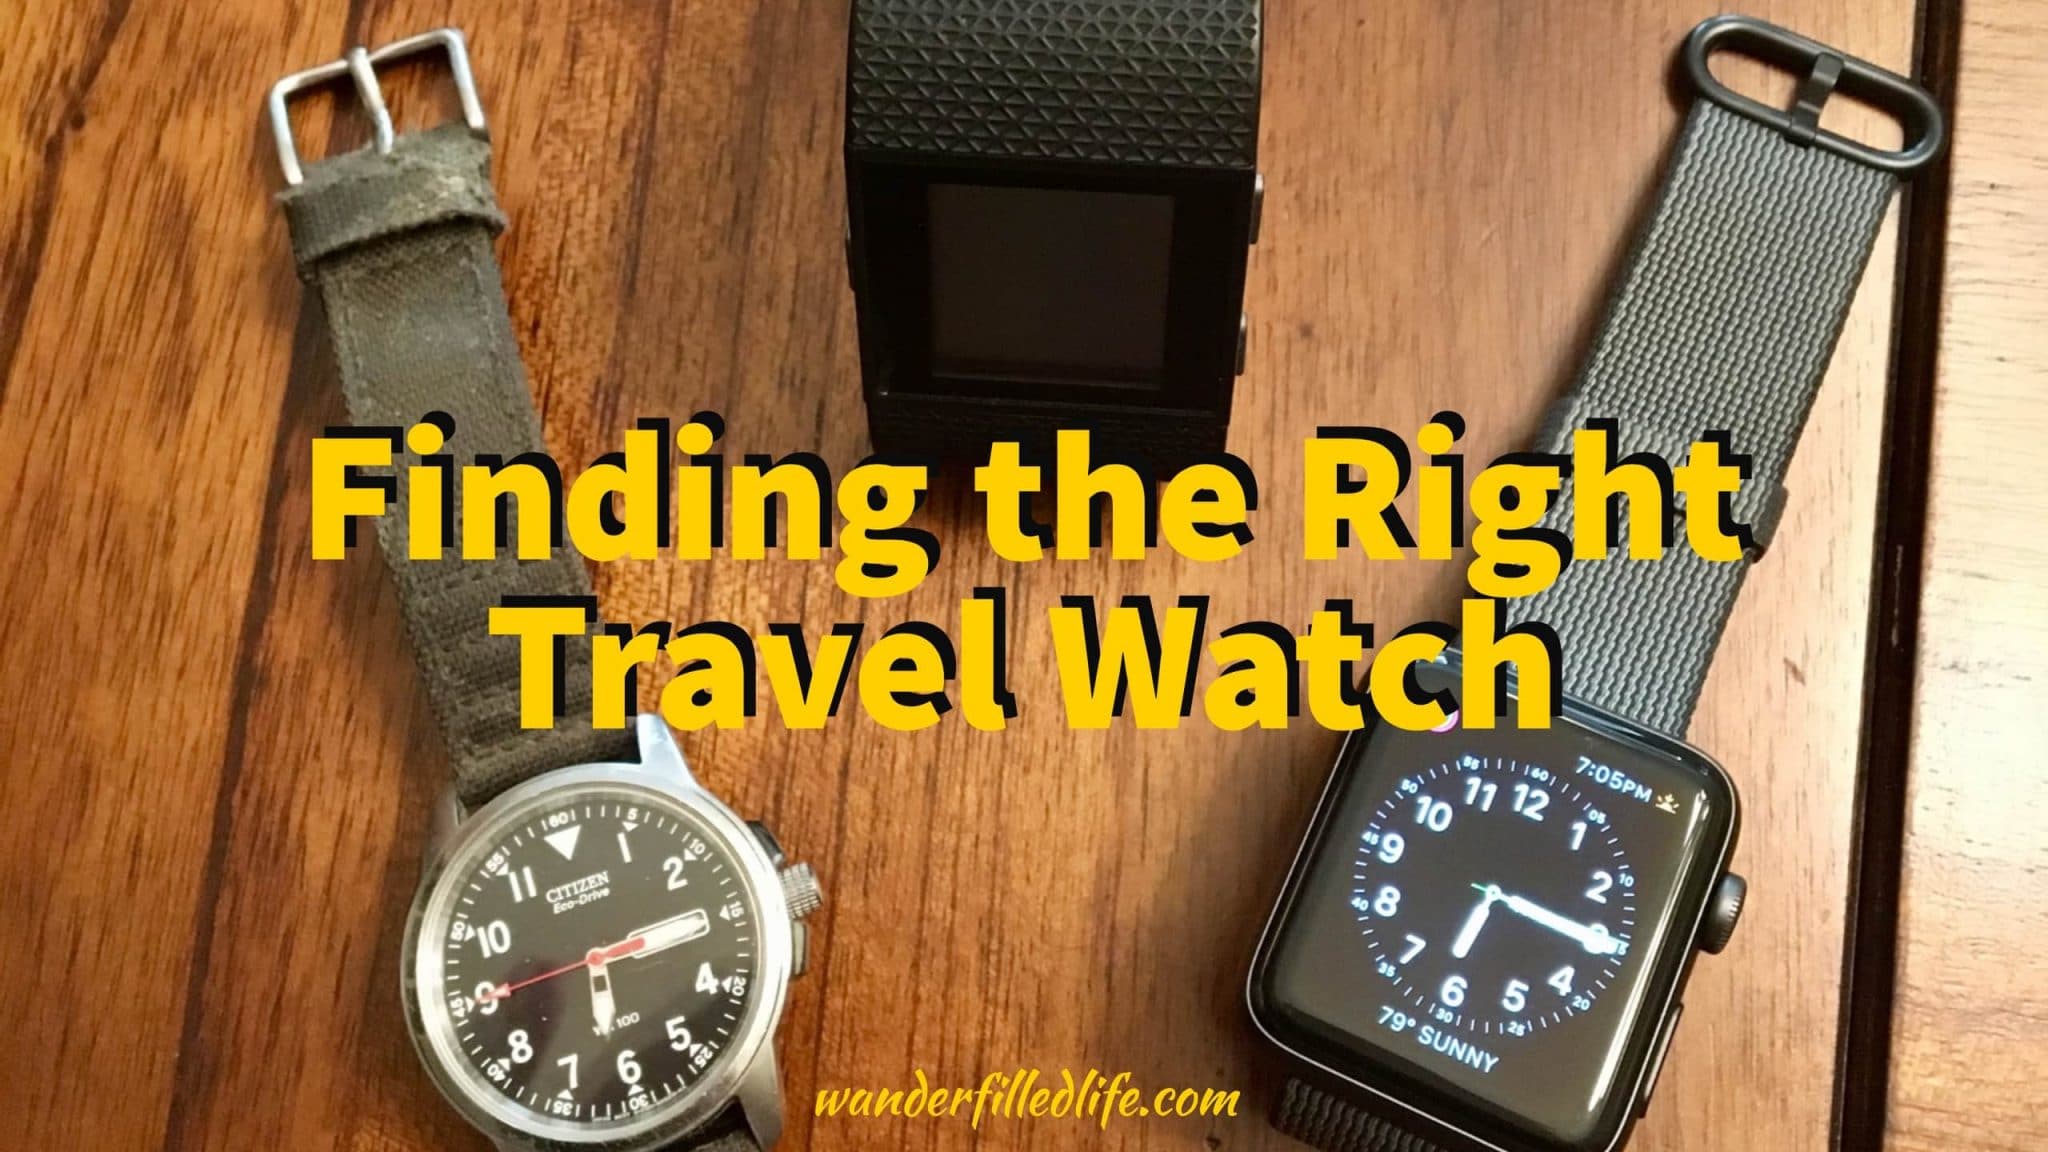 Finding the Right Travel Watch